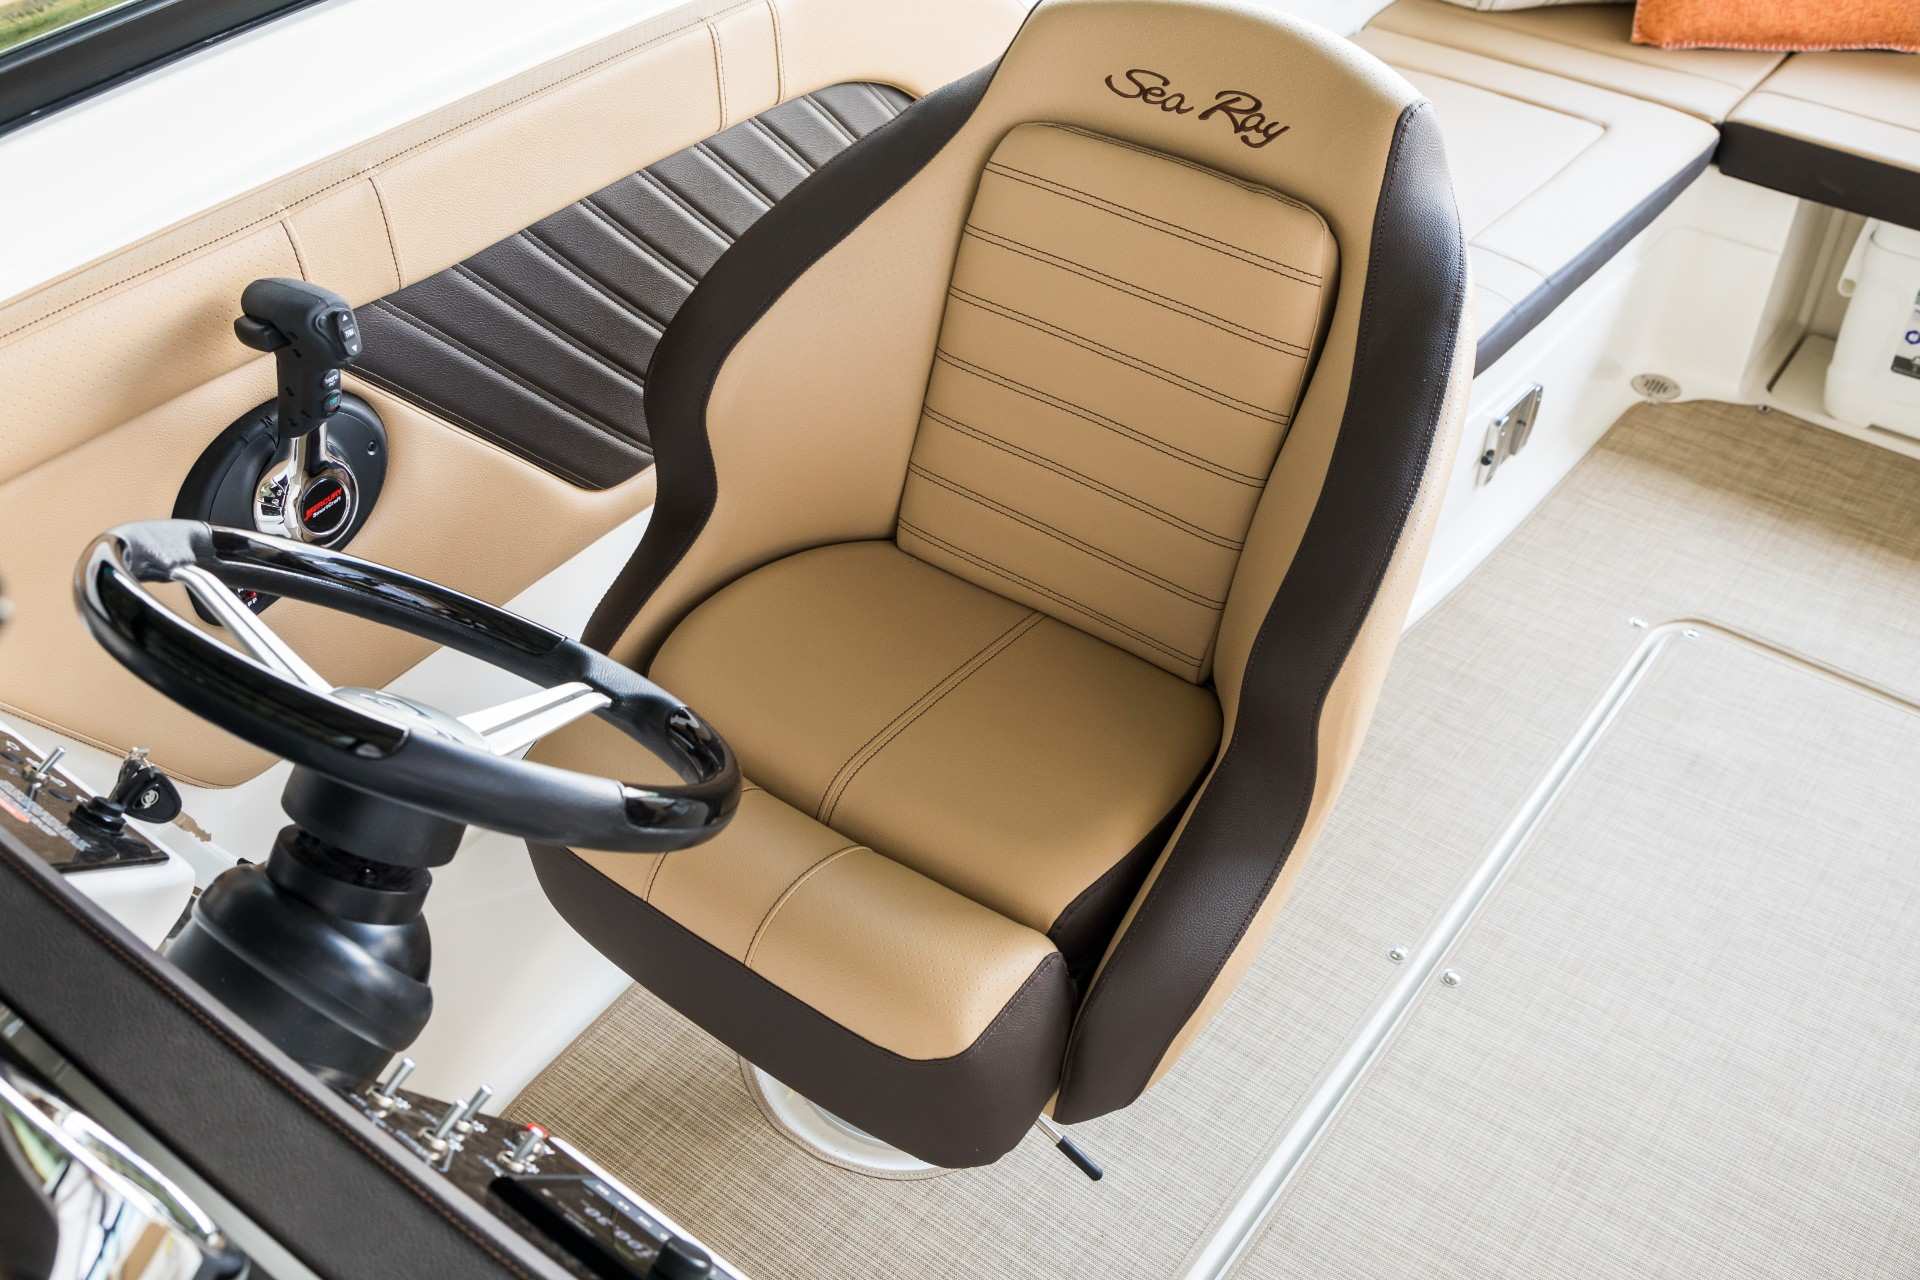 SPX 230 Outboard helm seat